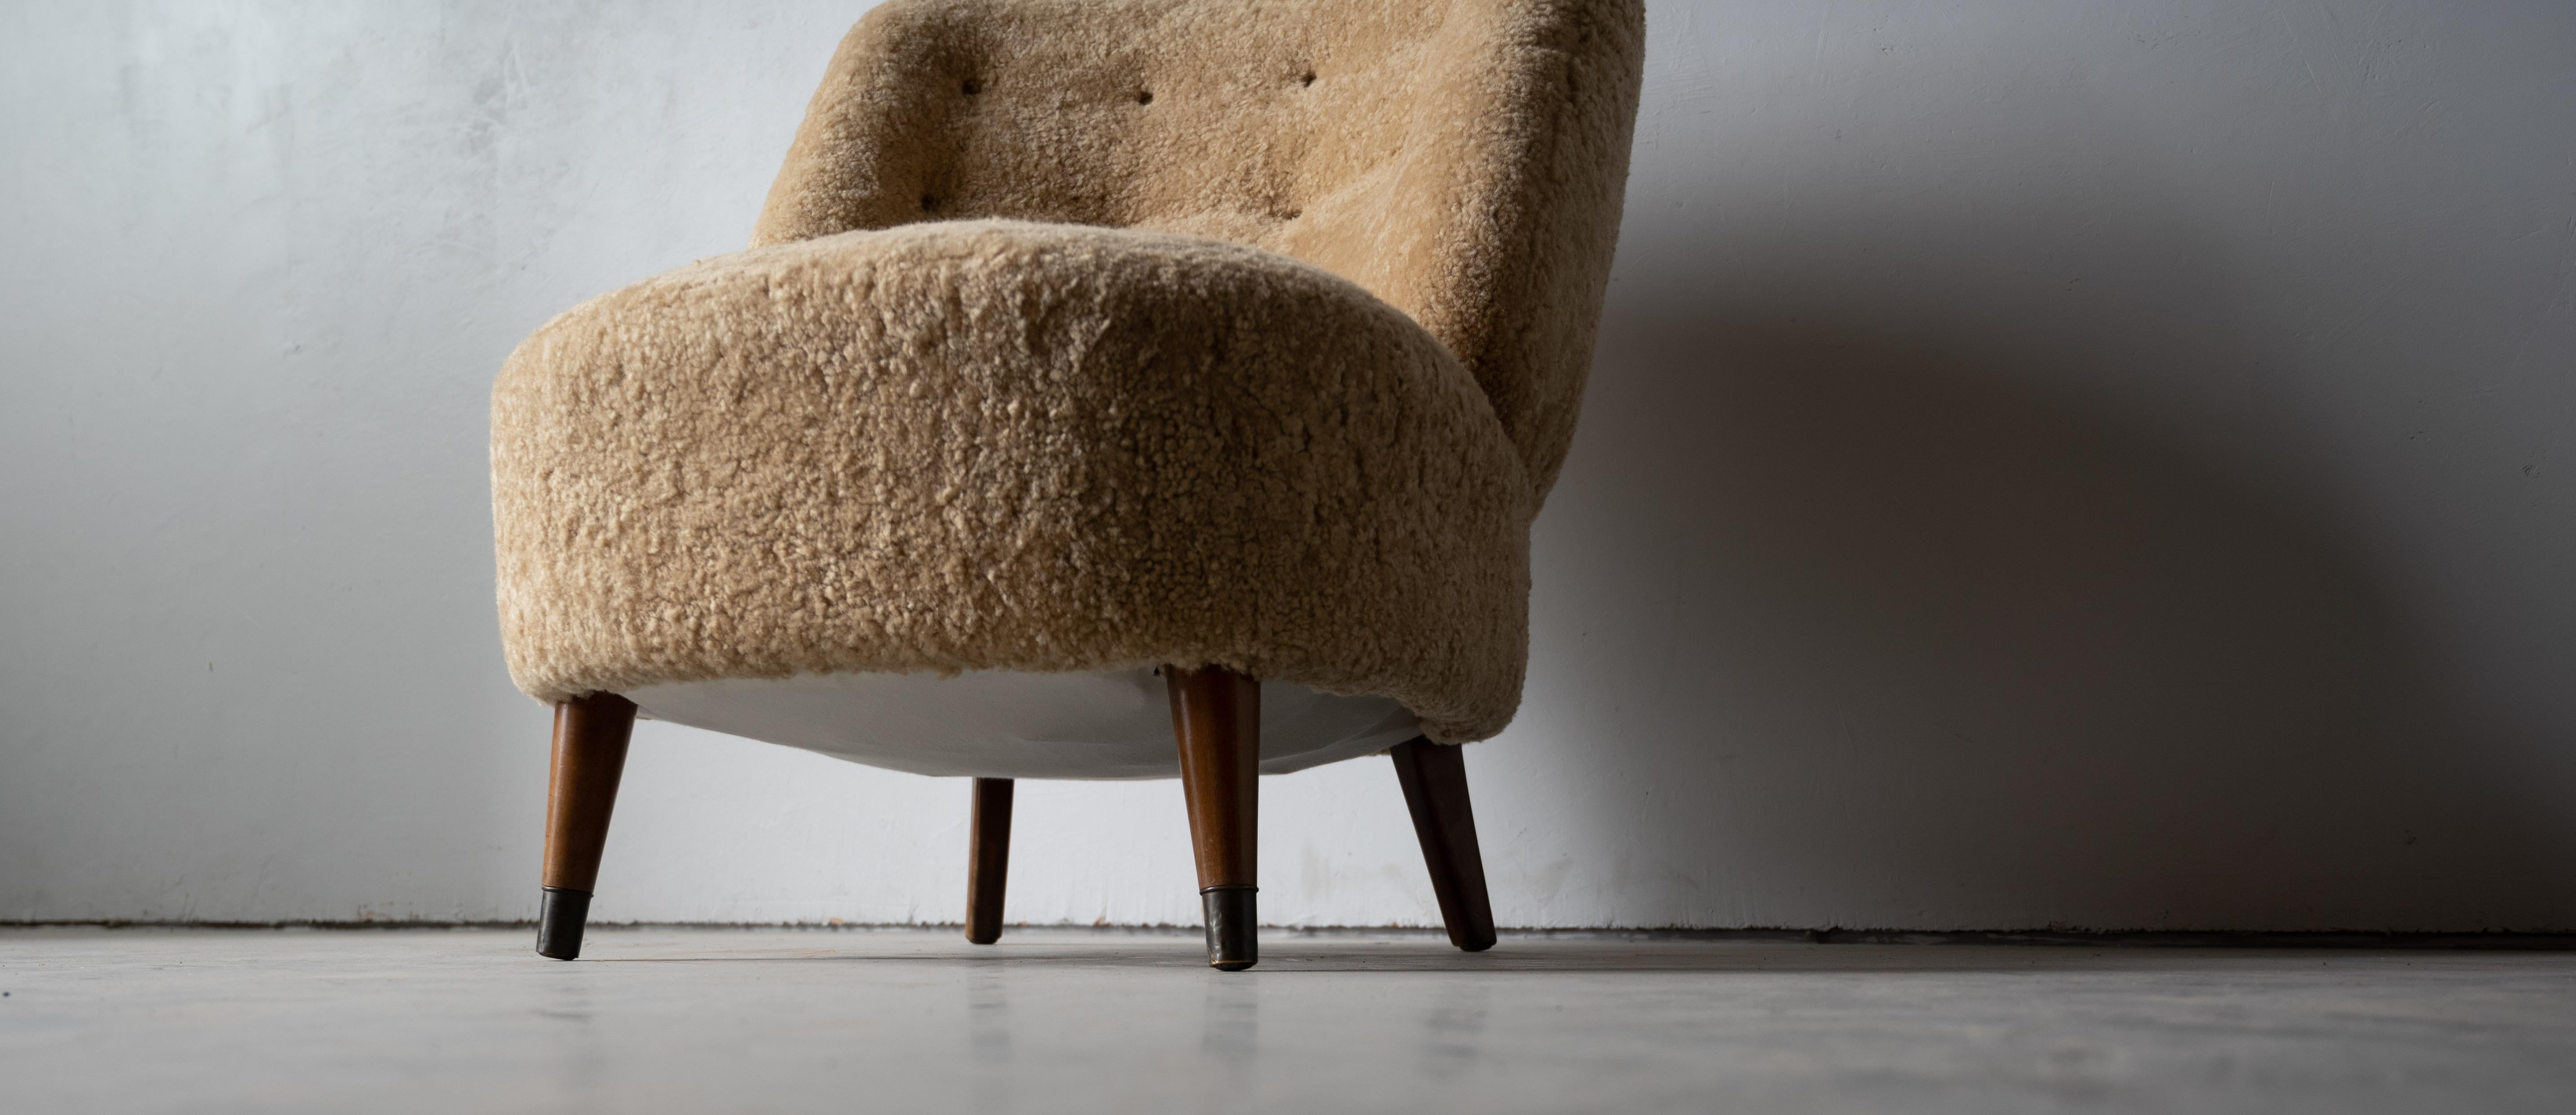 Sven Staaf, Lounge Chair, Beige Shearling, Wood, Sweden, 1940s For Sale 1